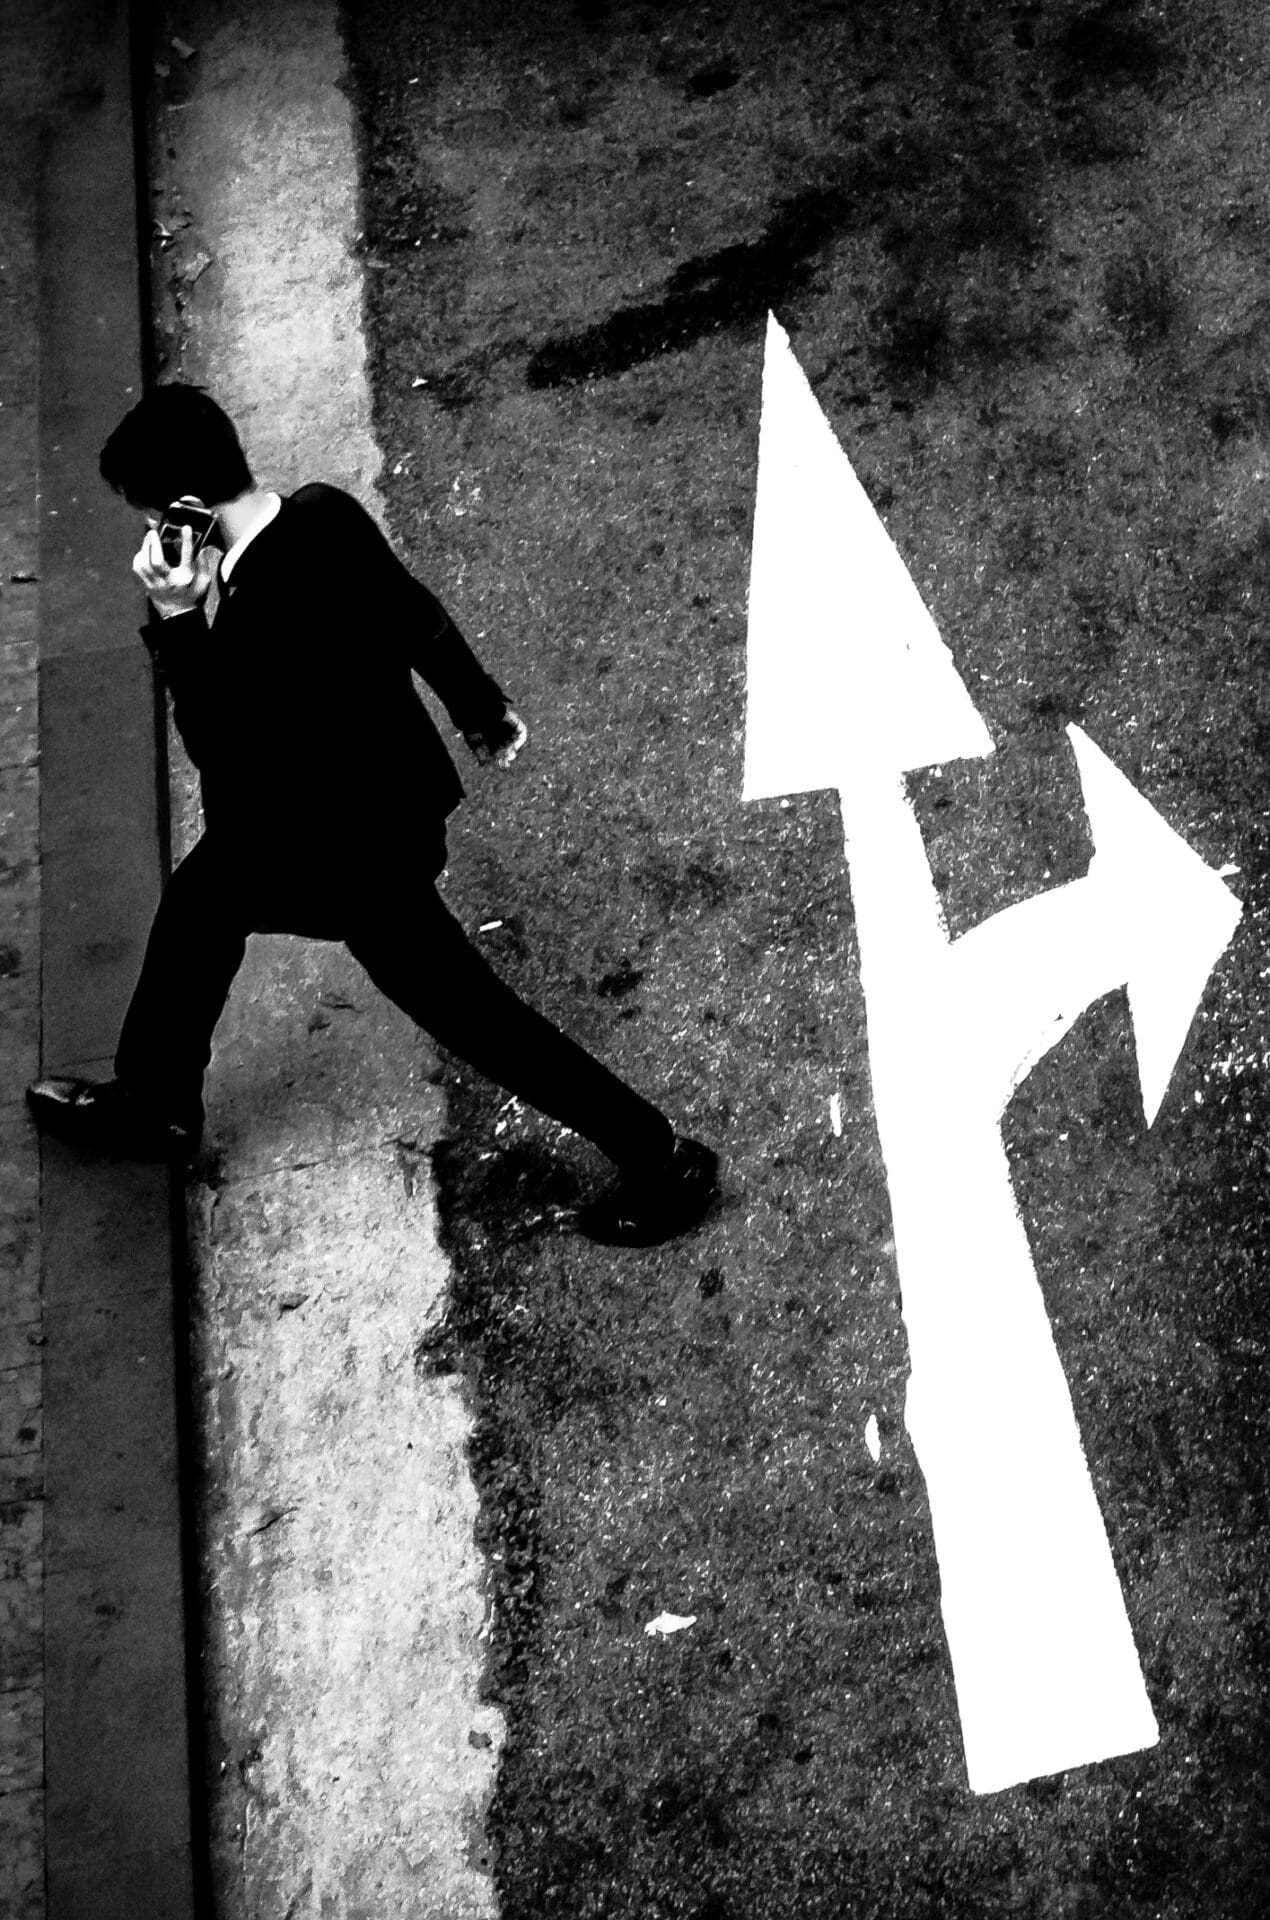 Jason Au | A dark-suited man on his phone crosses the road at the business heart of Hong Kong. His mid-stride motion juxtaposes with the white arrows marking on the road